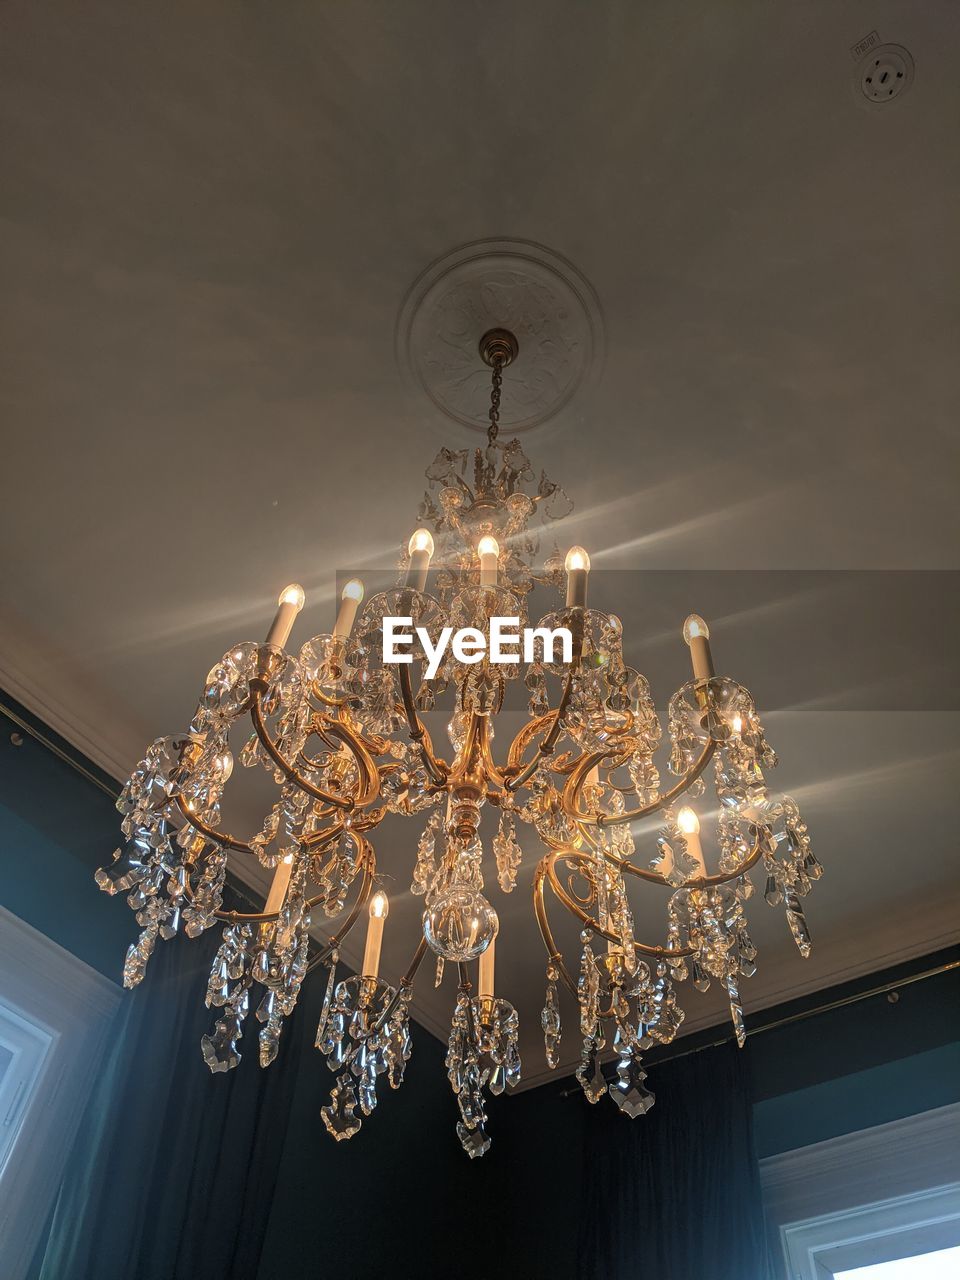 chandelier, light fixture, ceiling, lighting equipment, hanging, wealth, luxury, lighting, illuminated, indoors, low angle view, no people, decoration, light, elegance, electricity, architecture, glowing, light - natural phenomenon, home interior, pendant light, built structure, shiny, ornate, electric light